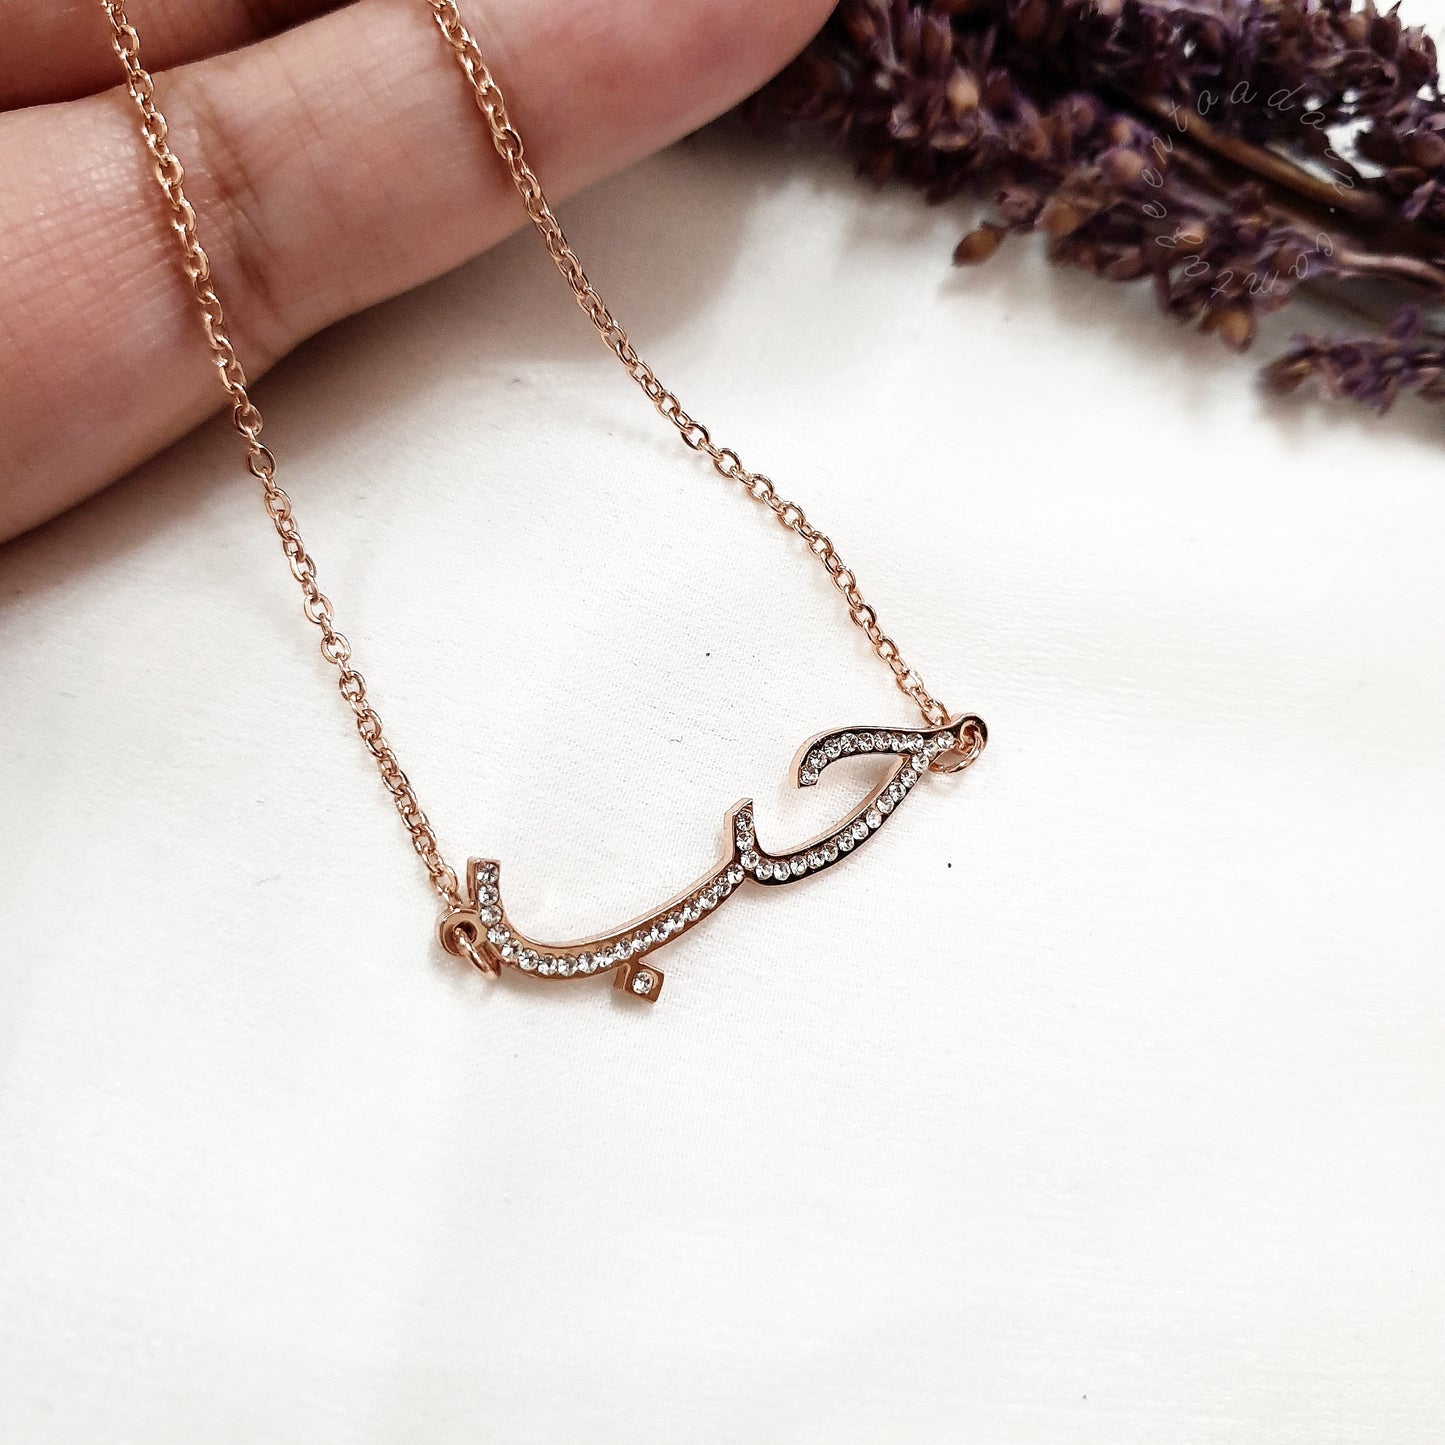 Diamante - حب -  Love -  Arabic Calligraphy Pendant Necklace - Rose Gold Plated Jewellery Eid Friendship Gift